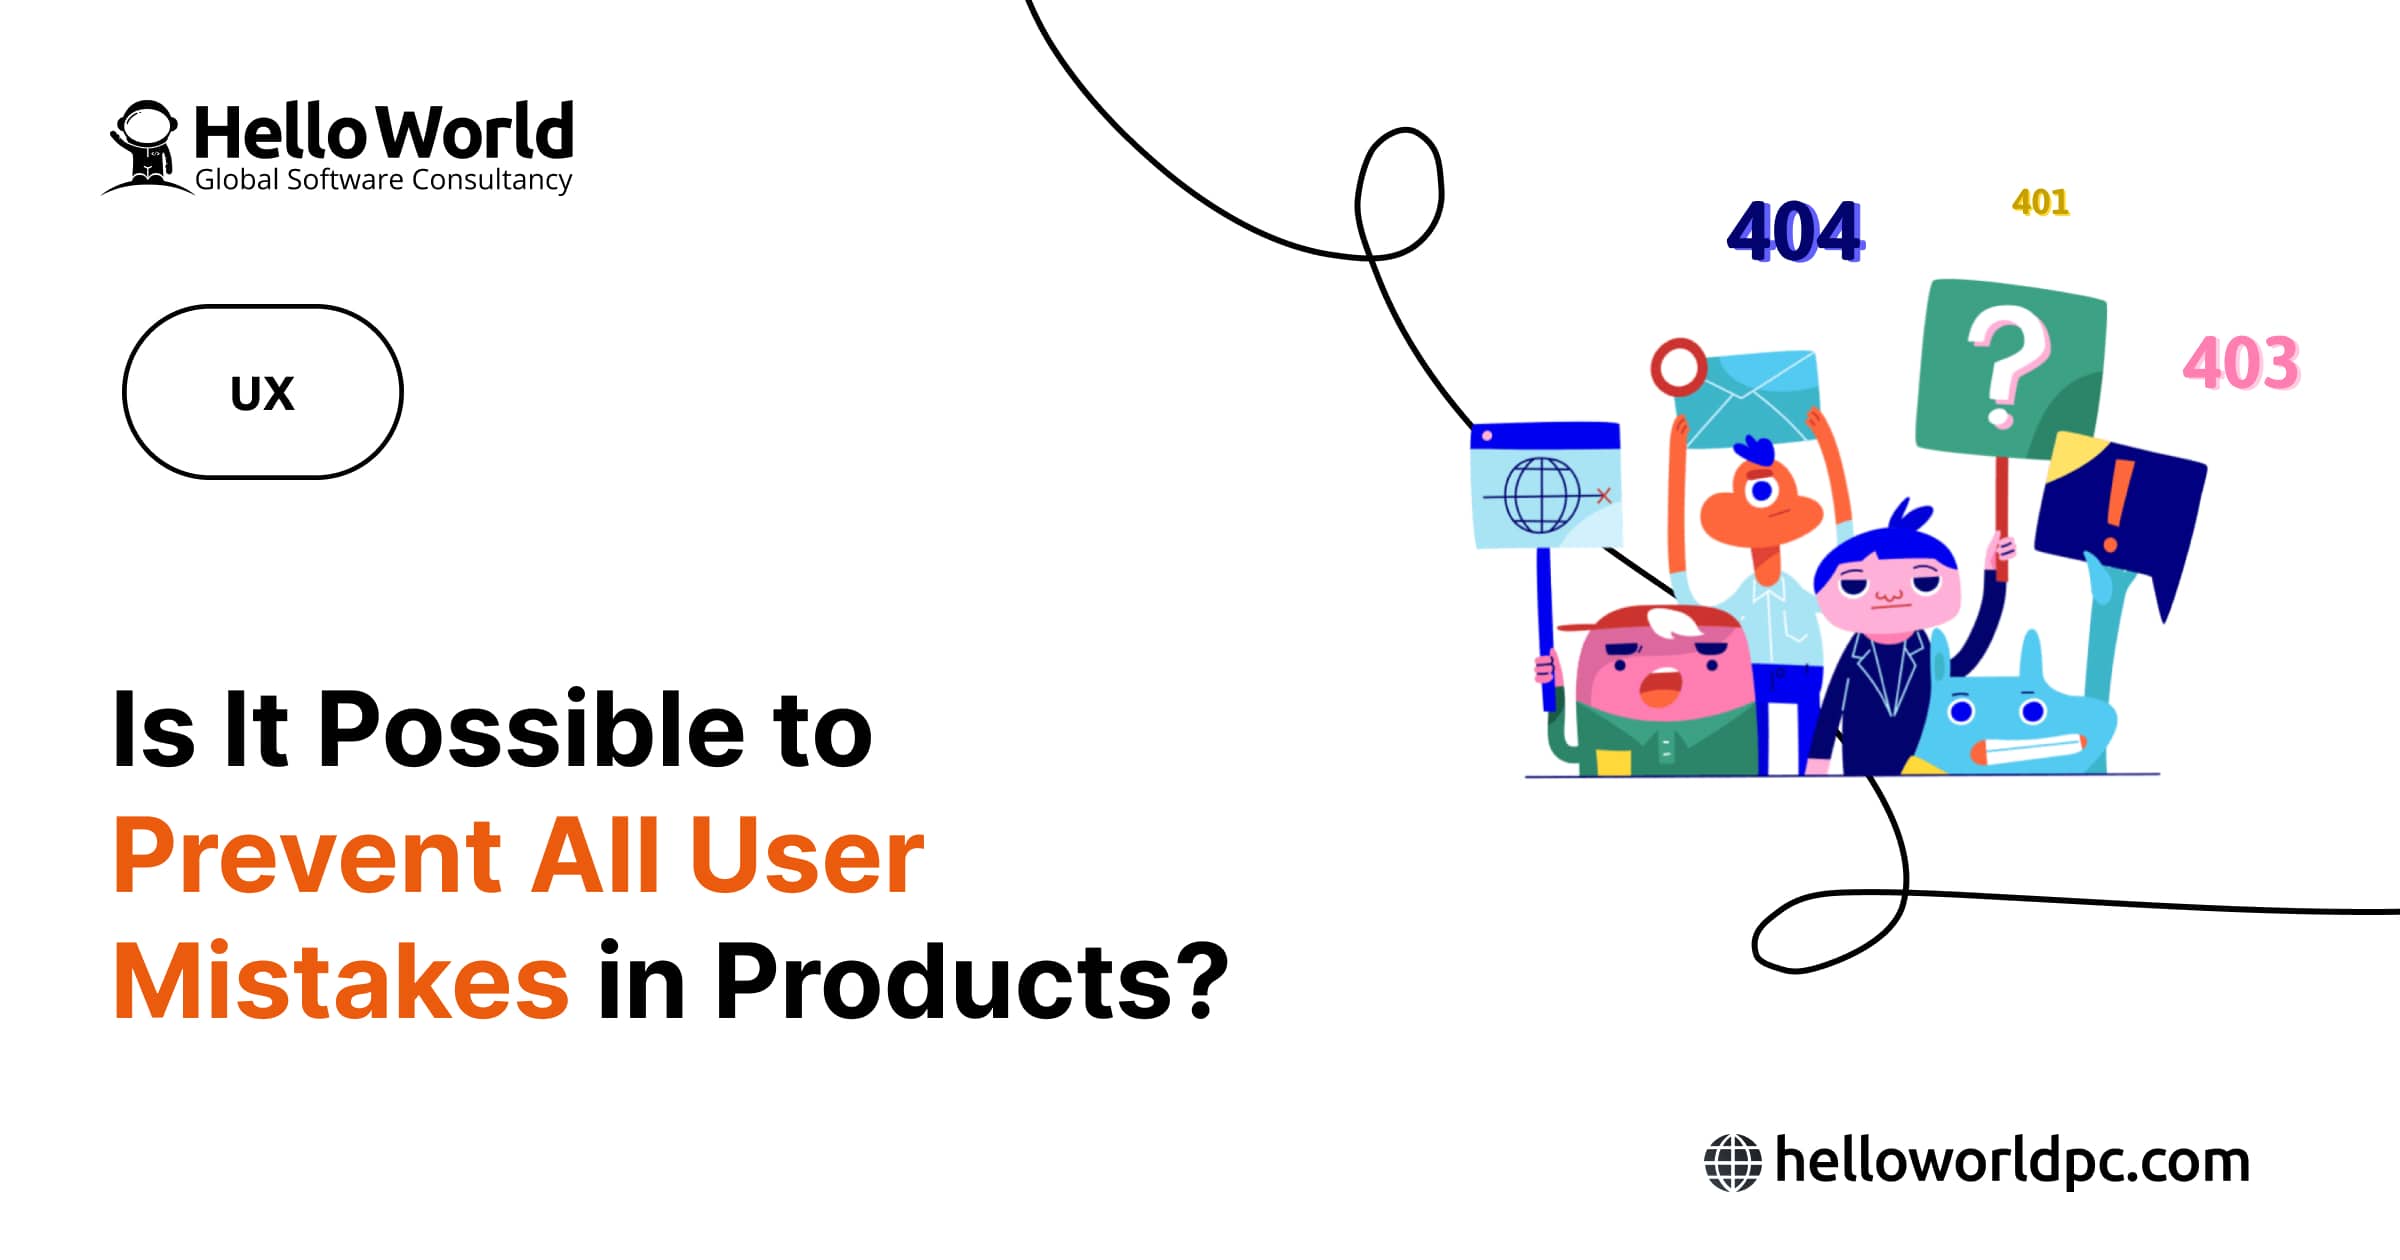 Is It Possible to Prevent All User Mistakes in Products?